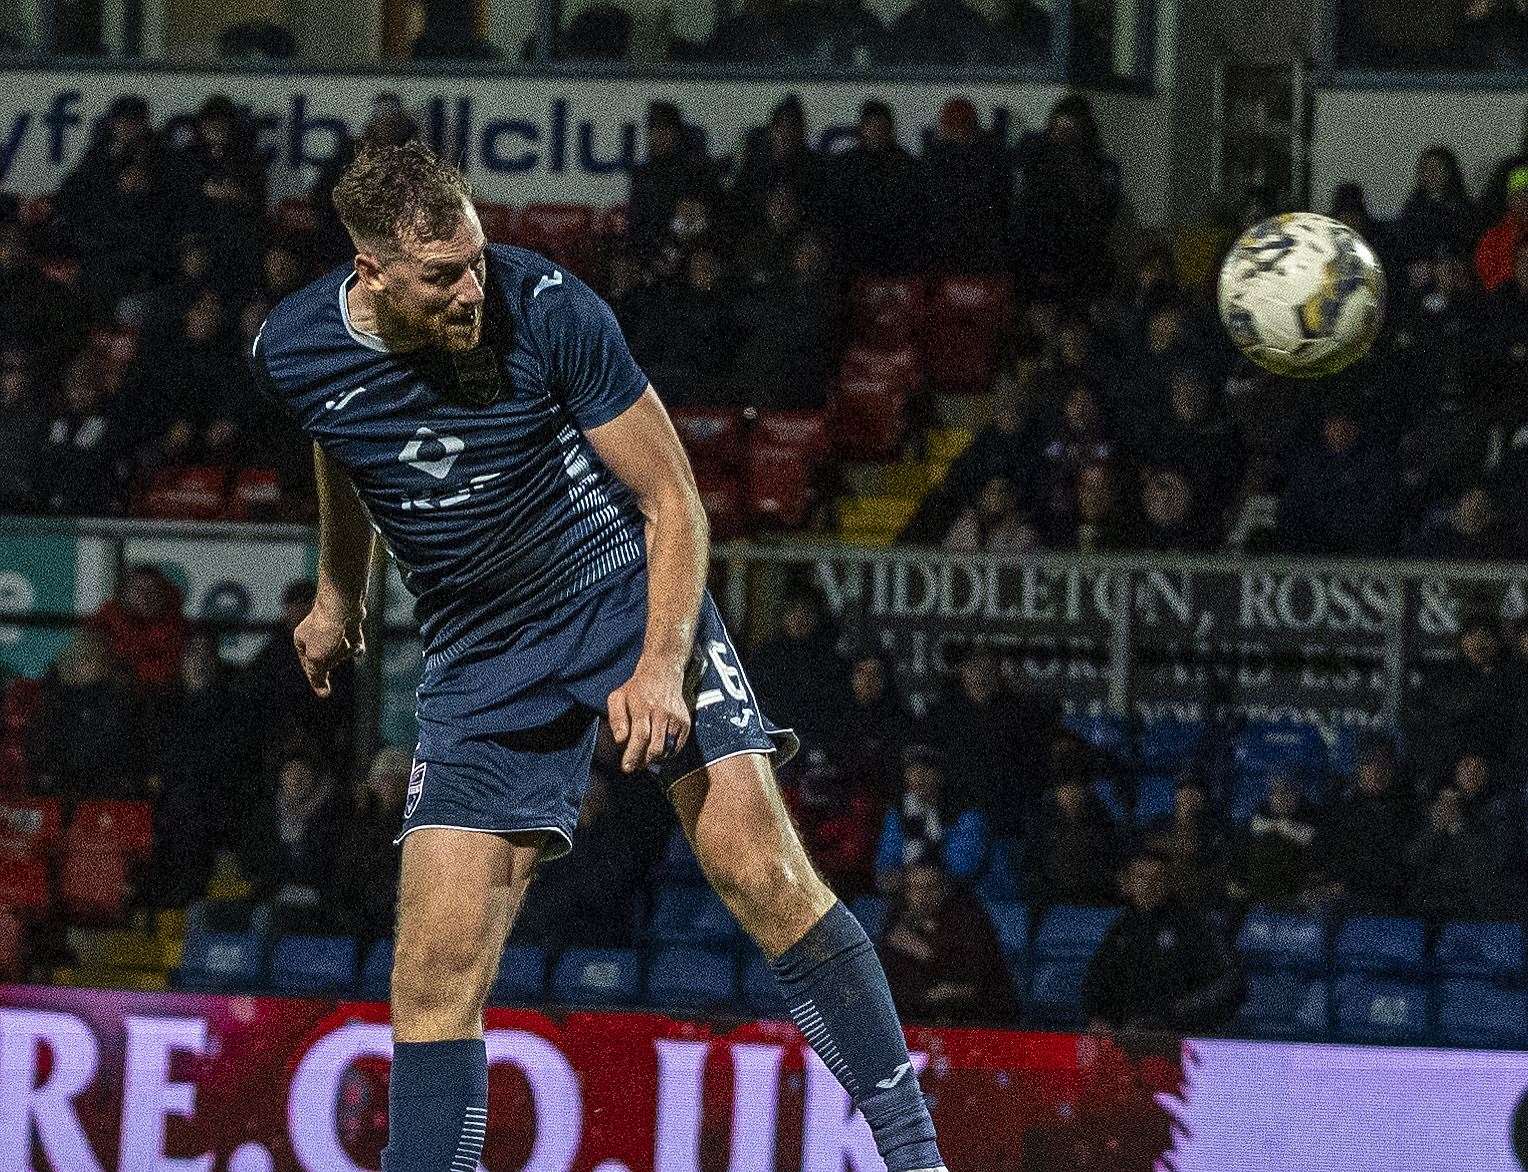 Jordan White capitalised on a defensive error from St Mirren to put Ross County ahead. Picture: Ken Macpherson